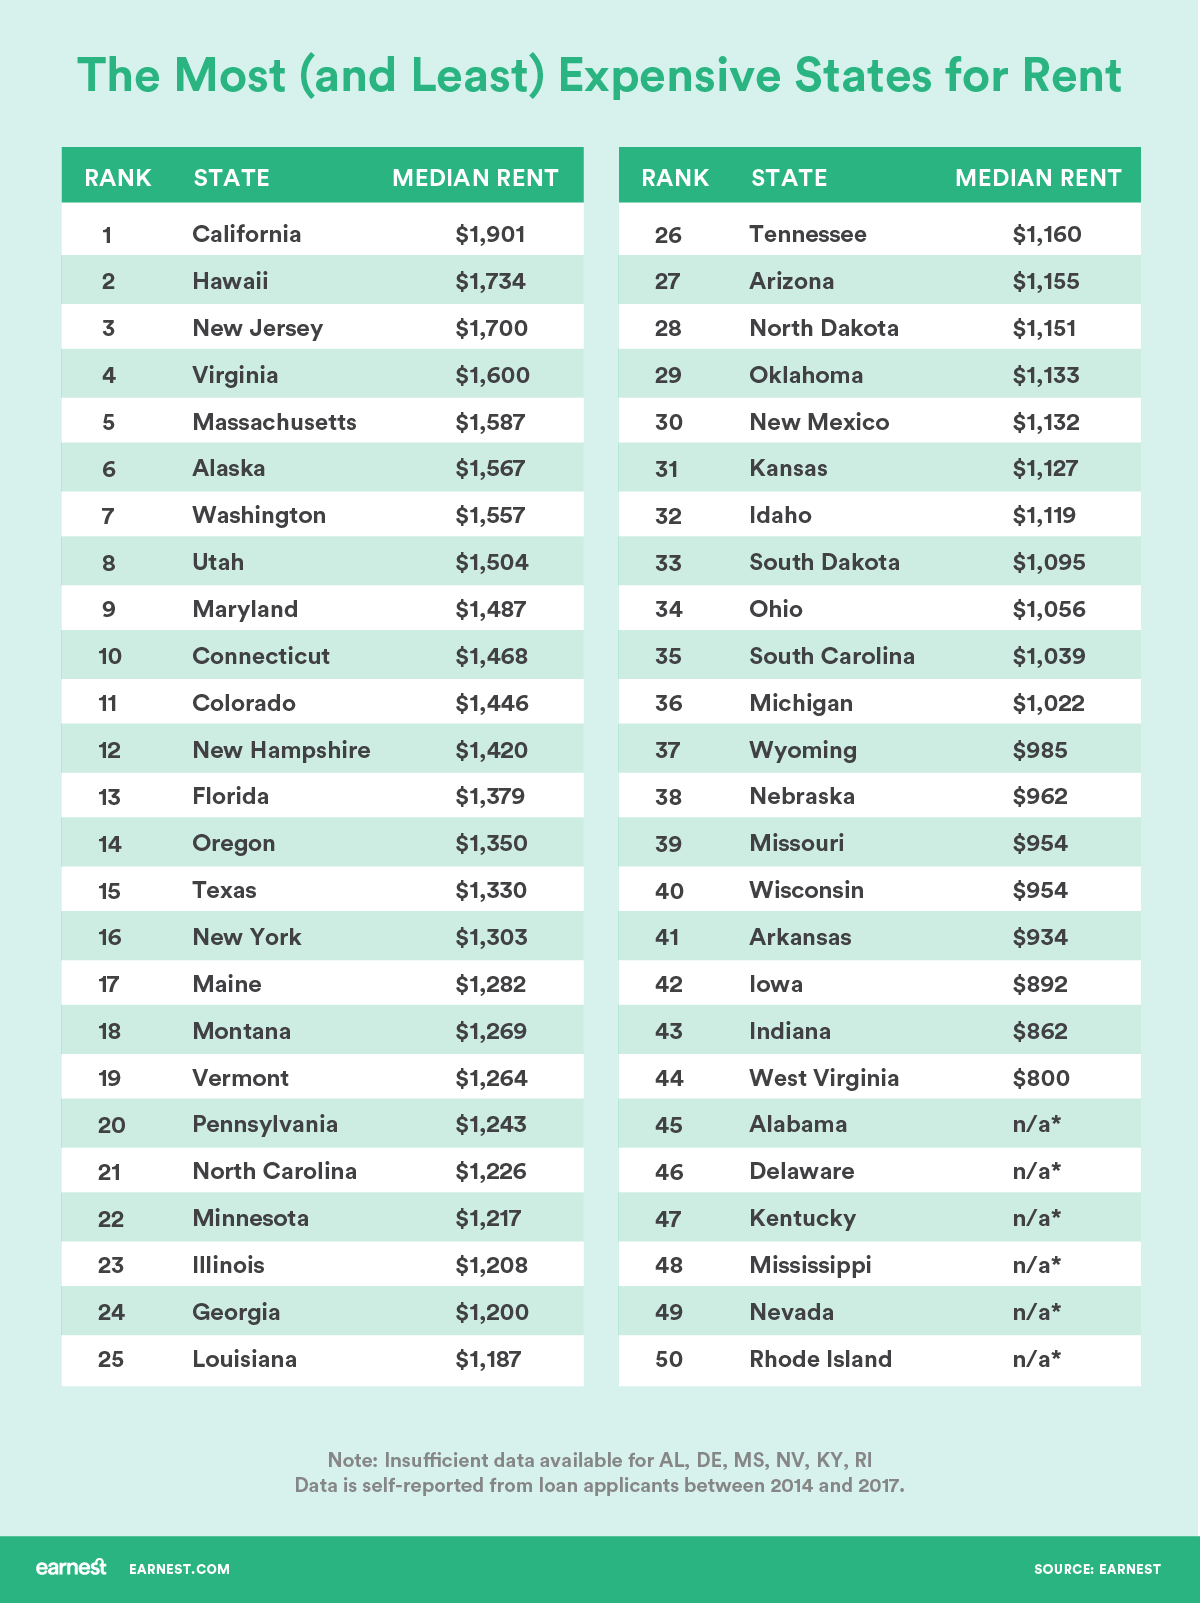 The 5 Most (And Least) Expensive States And Cities For Renters - Earnest